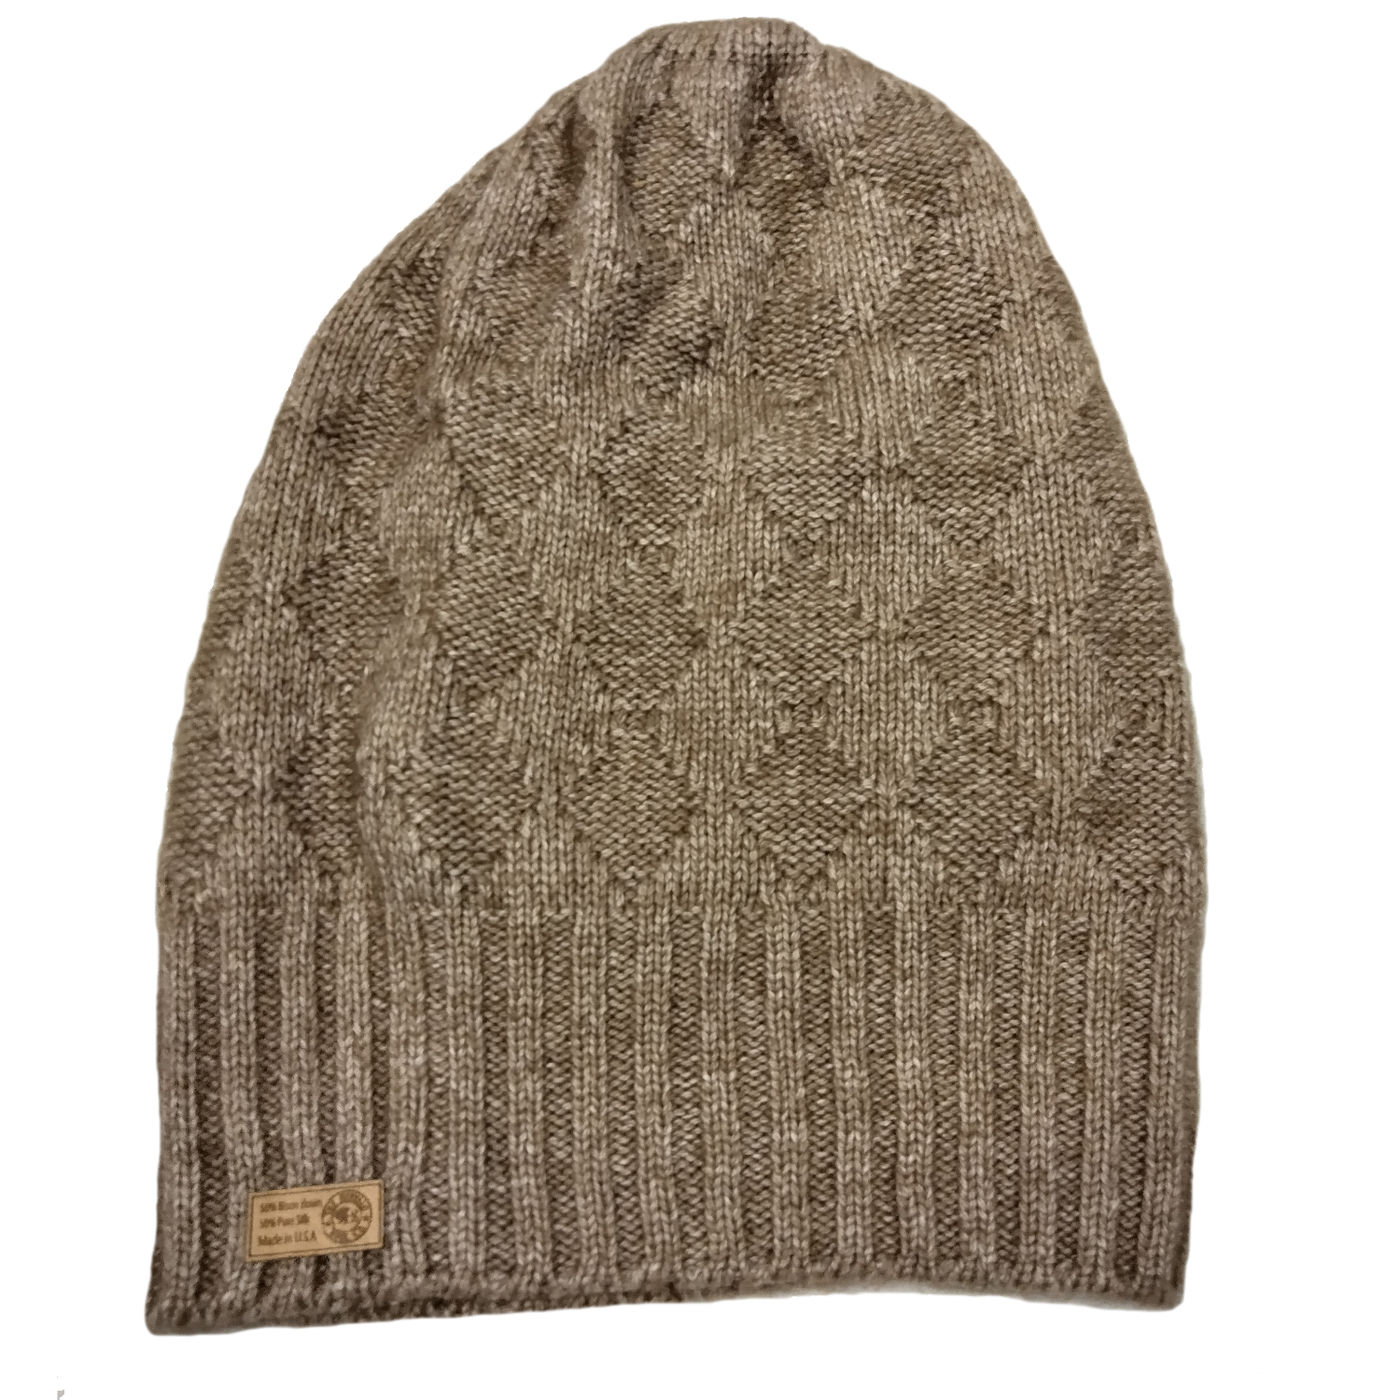 Bison Beanie Slouched